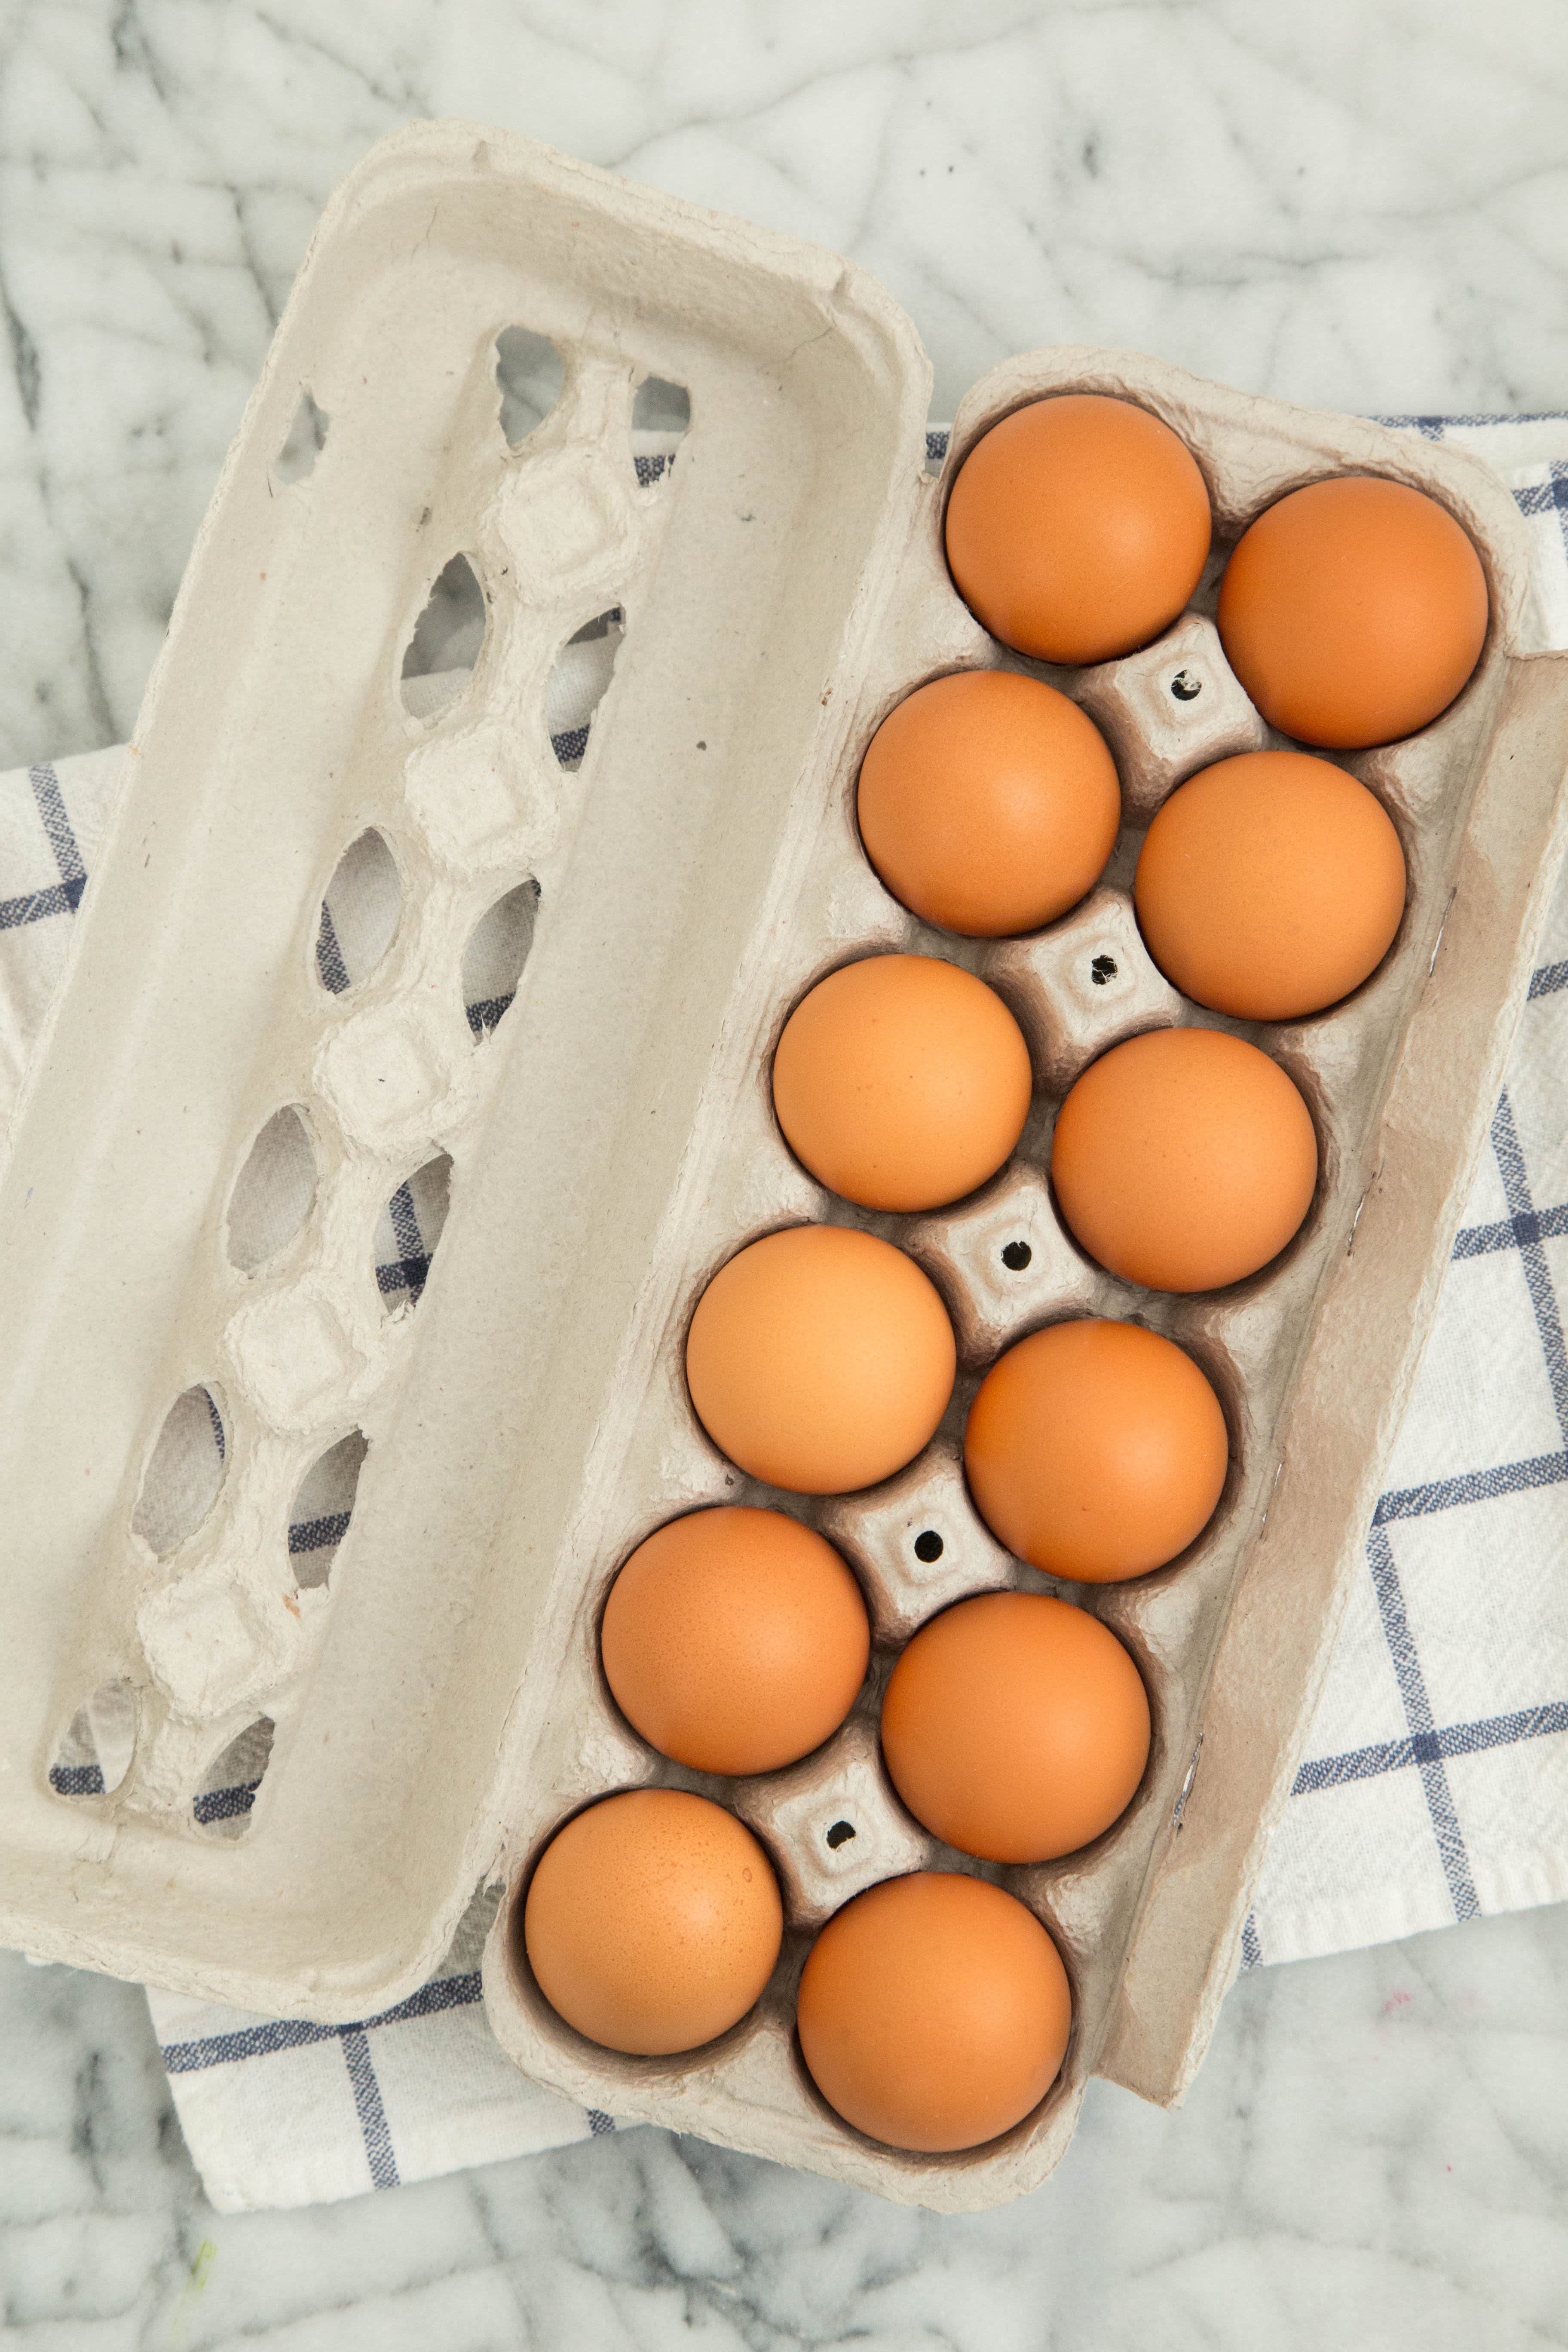 Do Eggs Expire, and Is It Safe to Eat Expired Eggs? Here's How to Tell